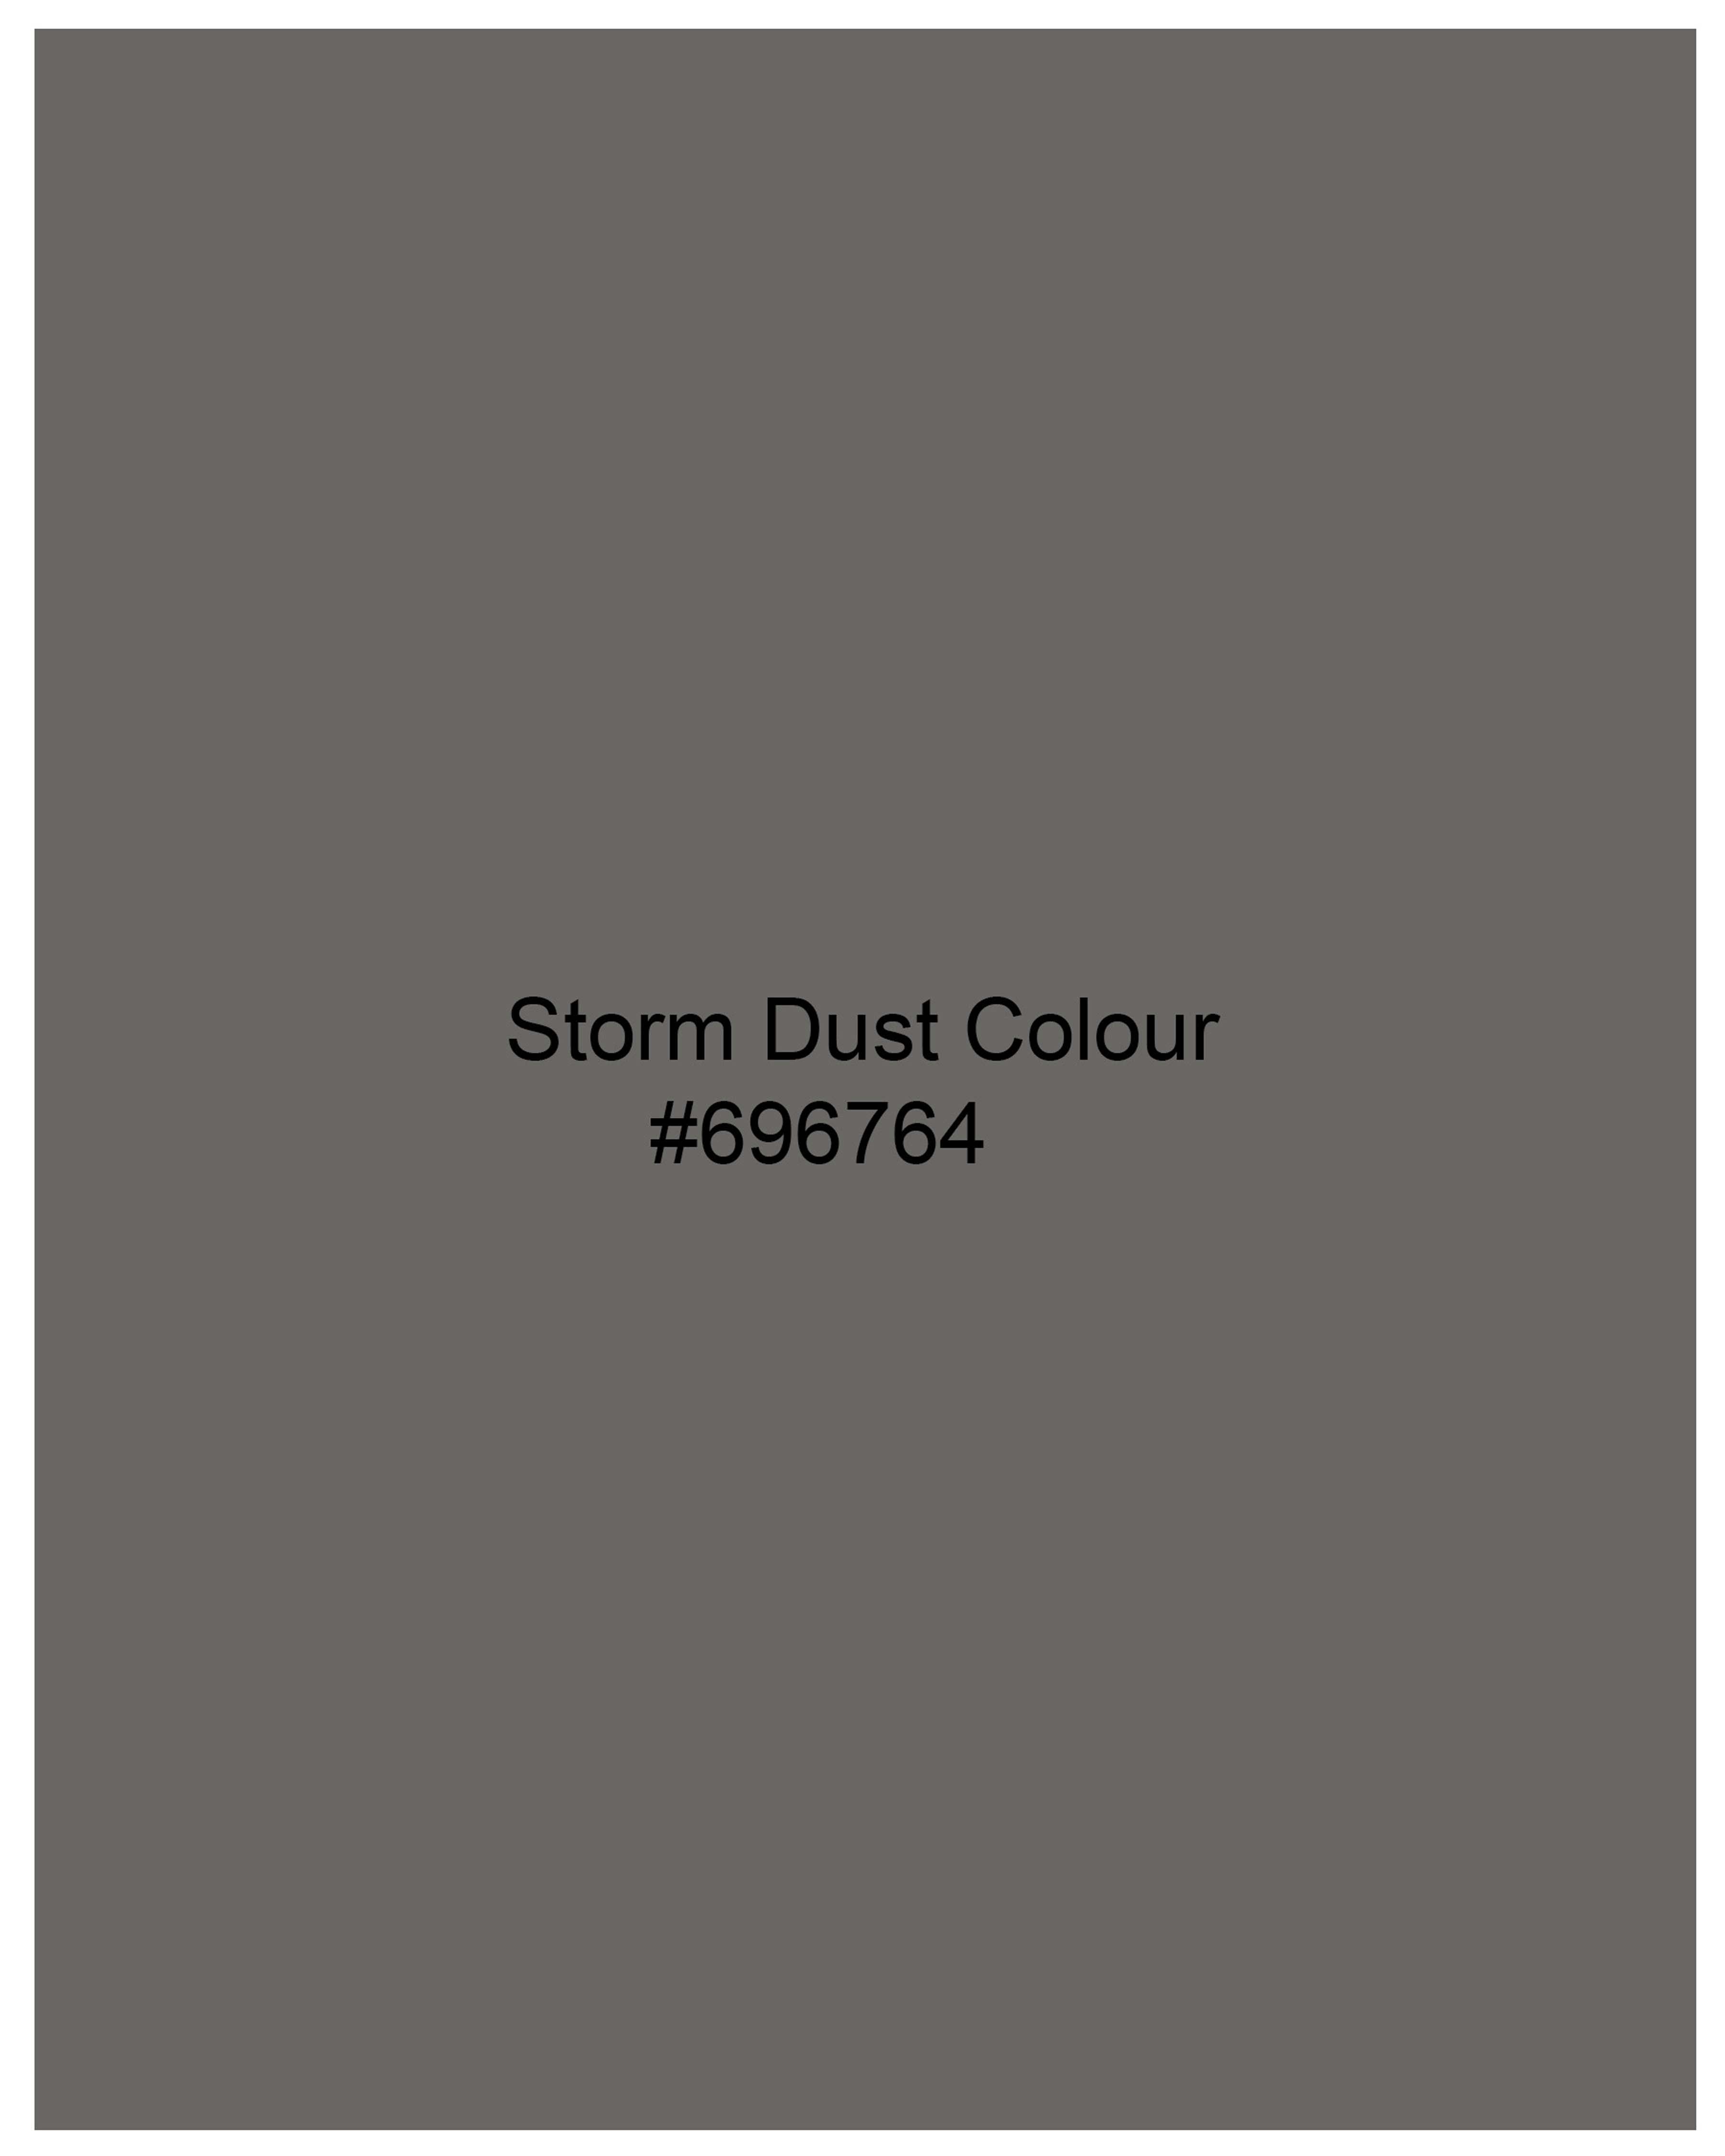 Storm Dust Gray Double Breasted Blazer BL2056-DB-36, BL2056-DB-38, BL2056-DB-40, BL2056-DB-42, BL2056-DB-44, BL2056-DB-46, BL2056-DB-48, BL2056-DB-50, BL2056-DB-52, BL2056-DB-54, BL2056-DB-56, BL2056-DB-58, BL2056-DB-60